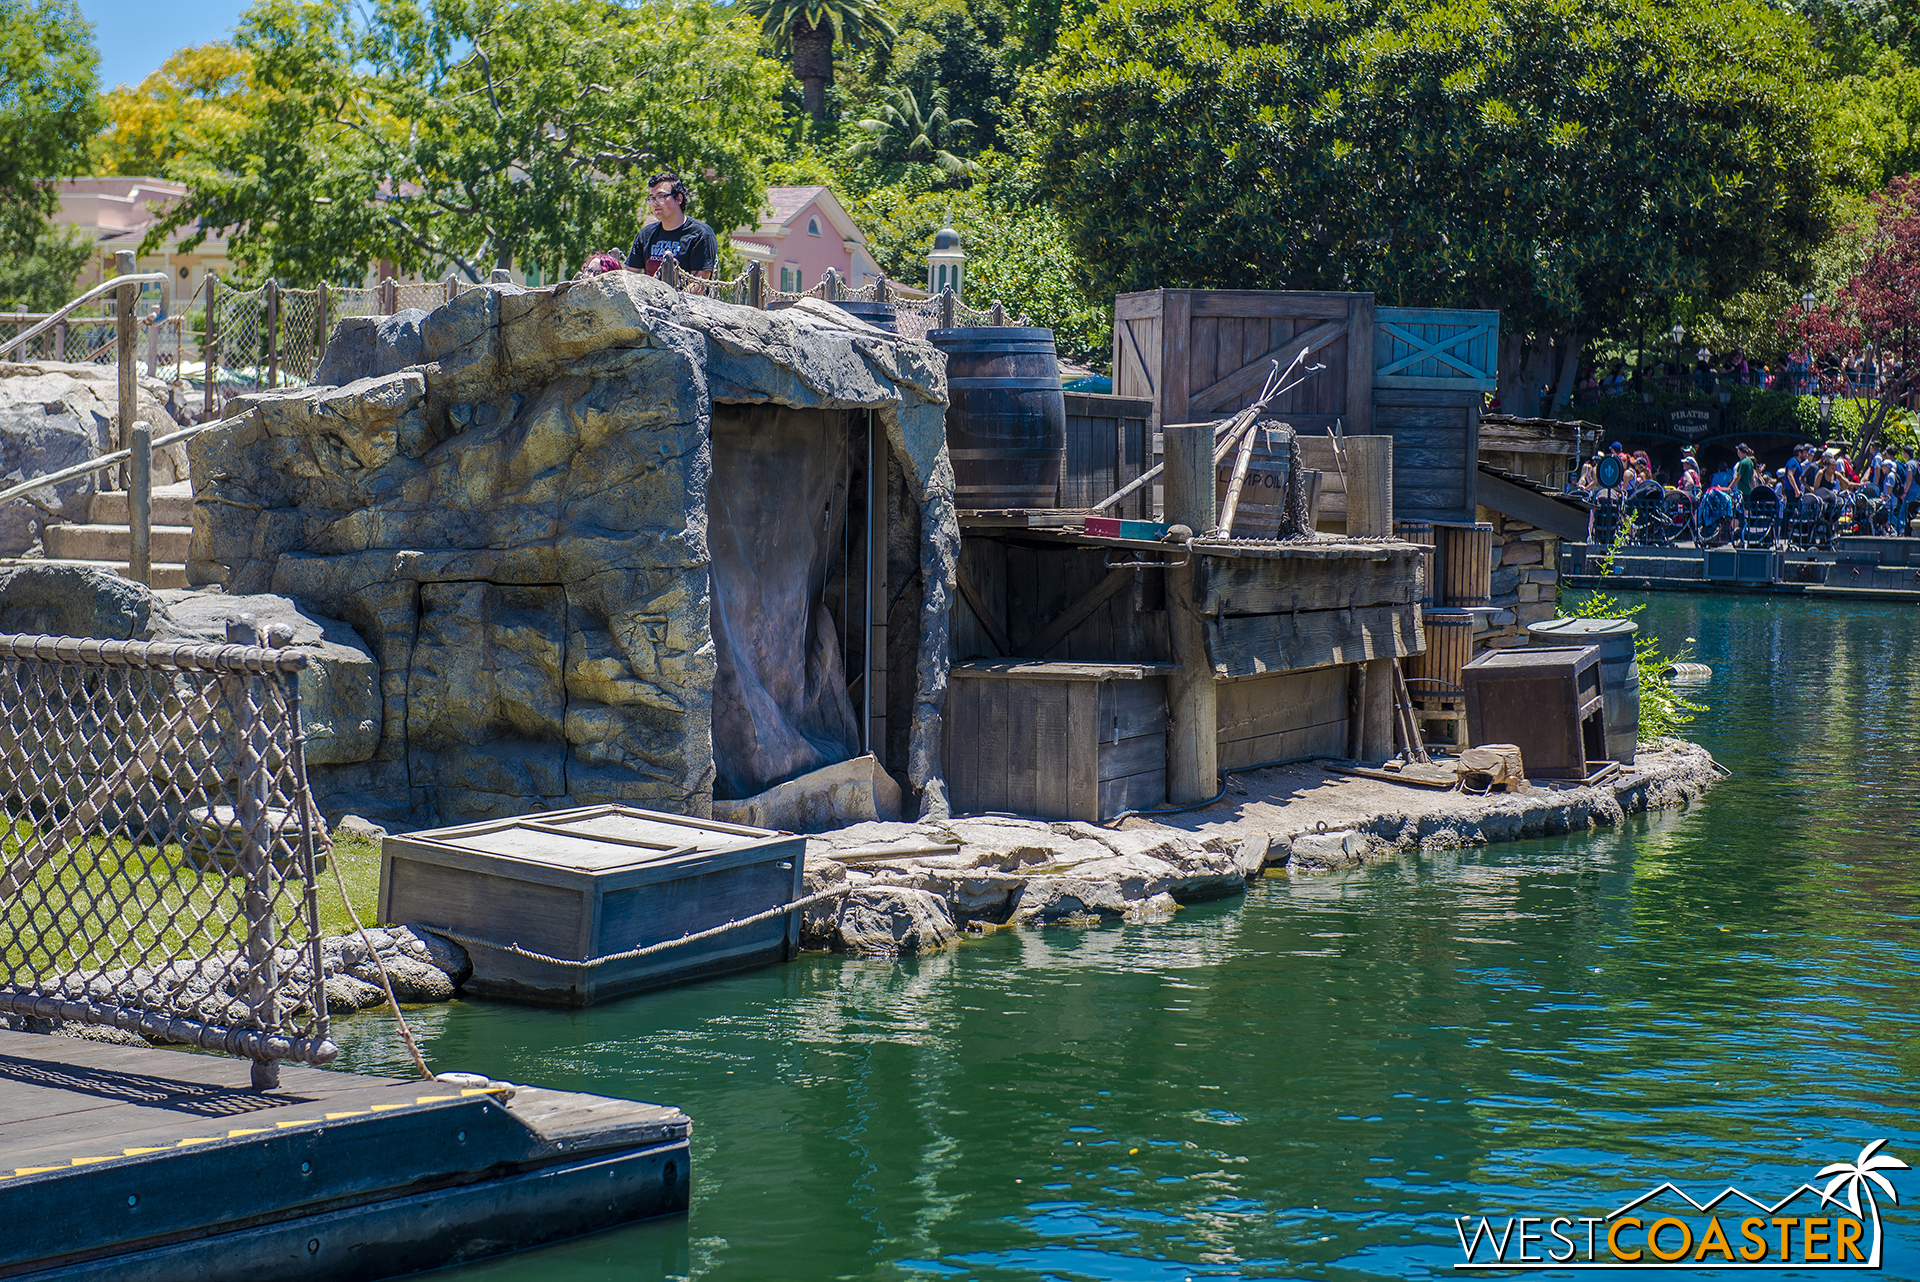  Well, it appears that Tom Sawyer Island isn't totally complete, but as you'll see in tomorrow's update, it's basically there. 